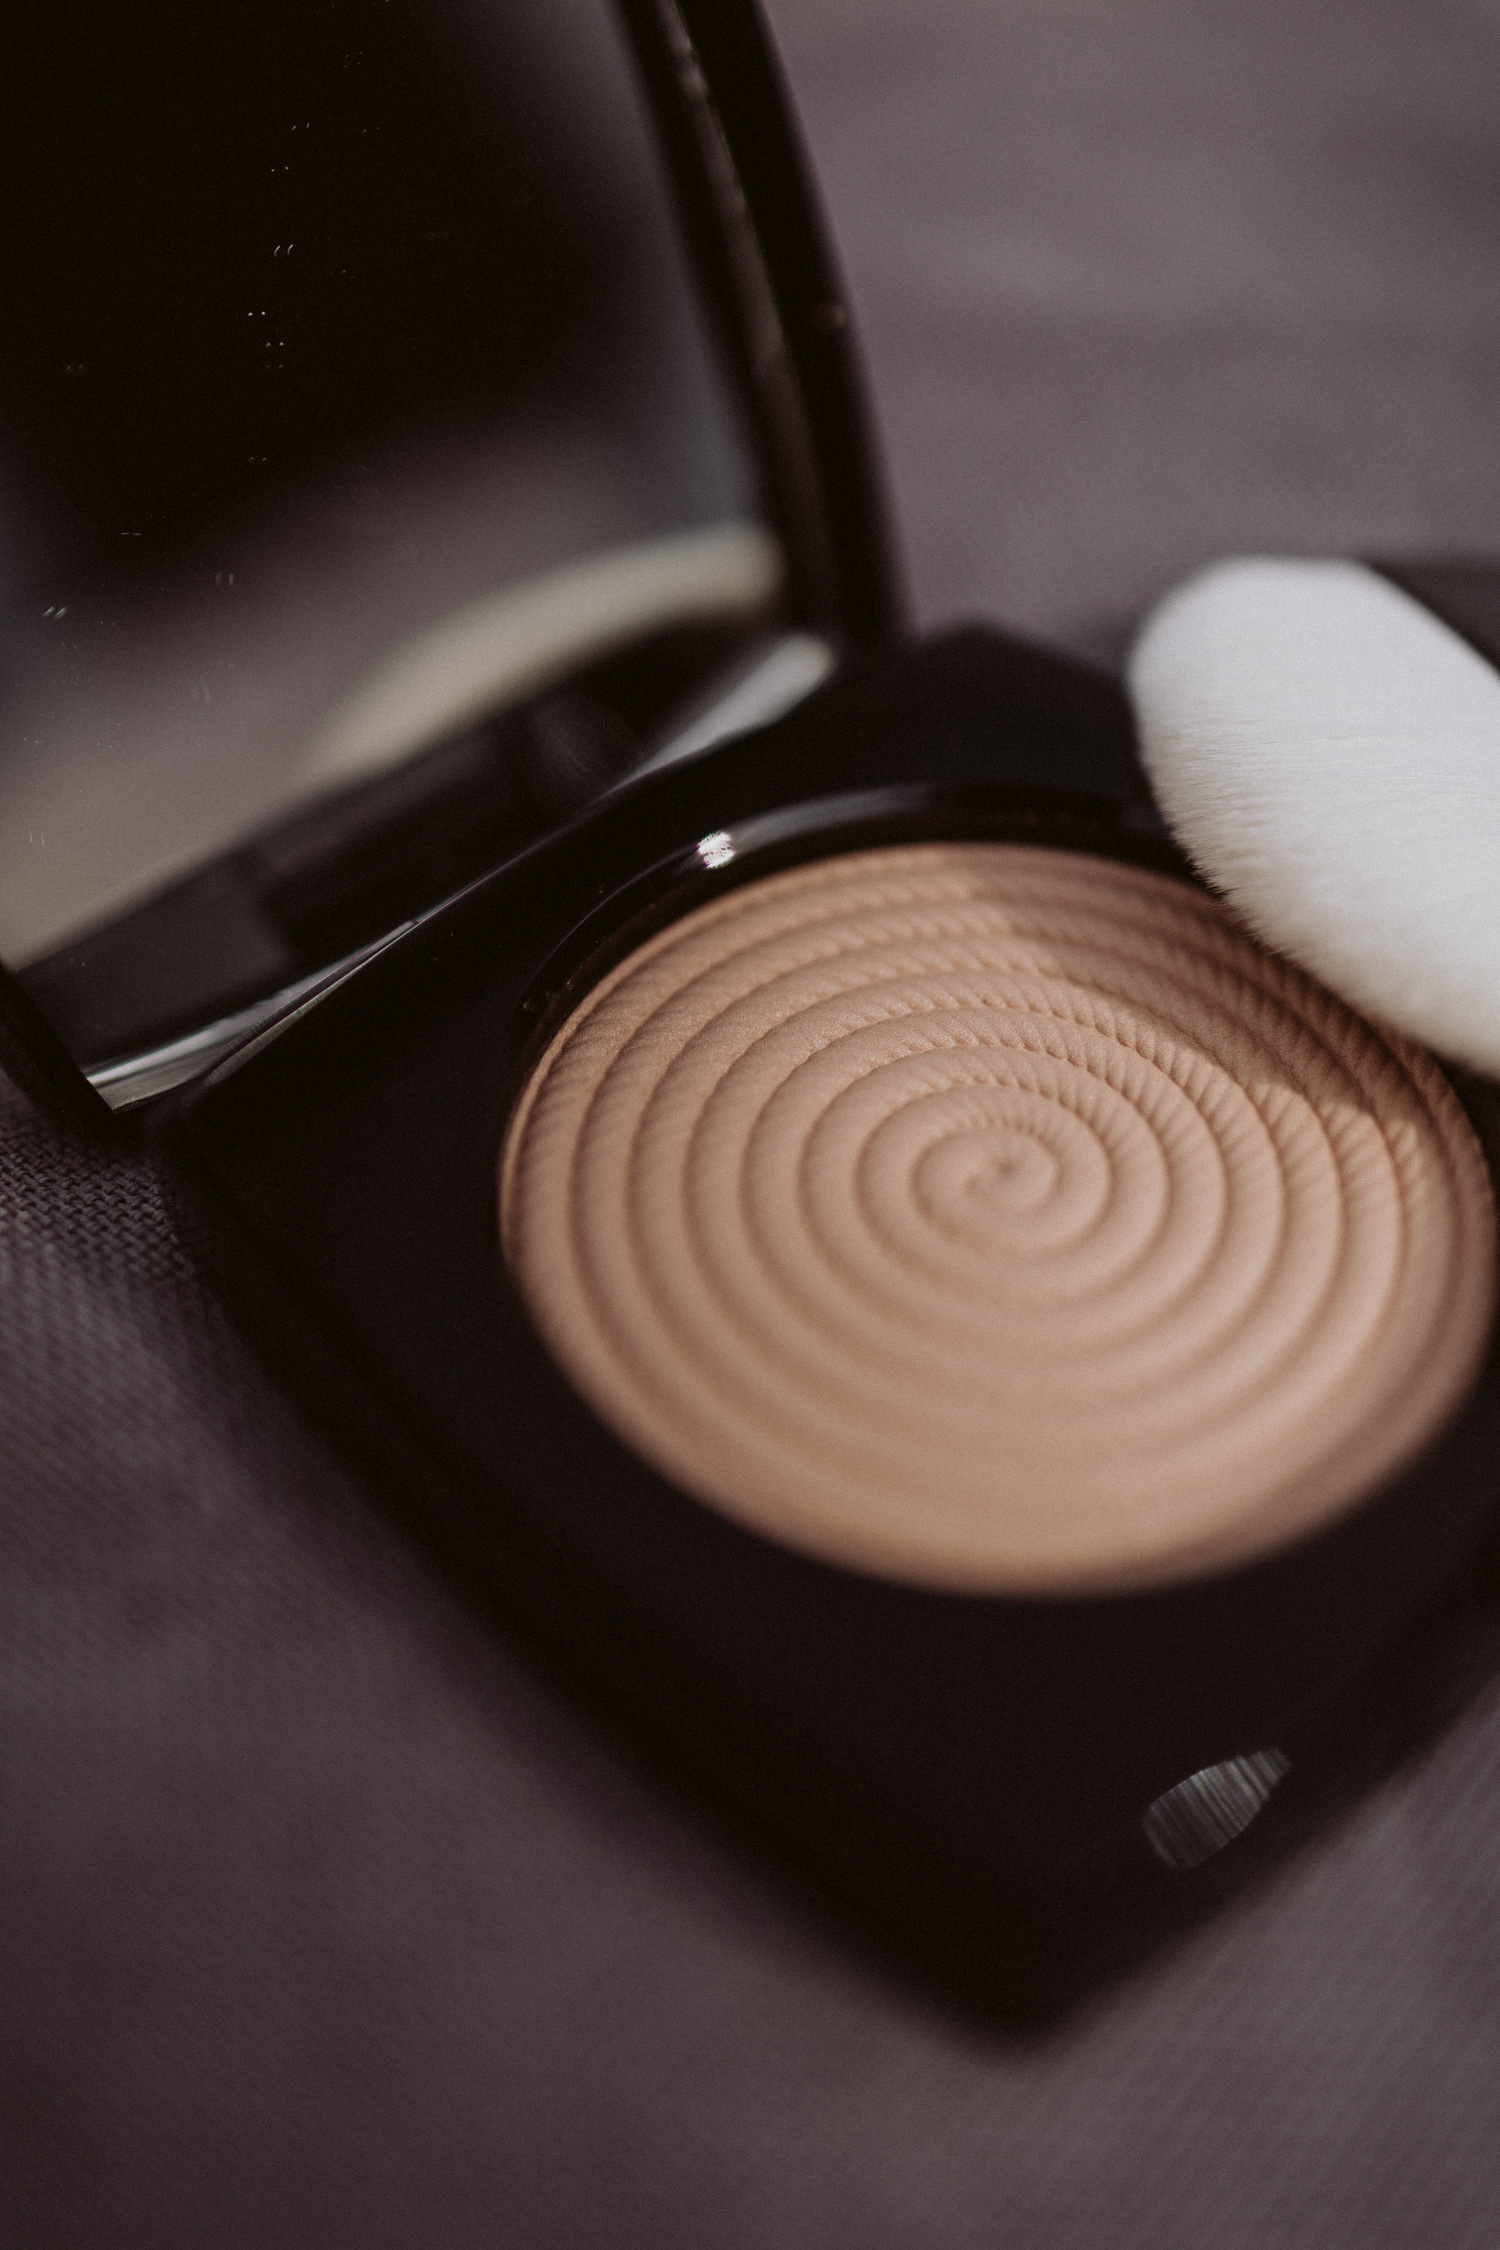 Chanel-Les-Beiges-Summer-Of-Glow - The Daily Dose